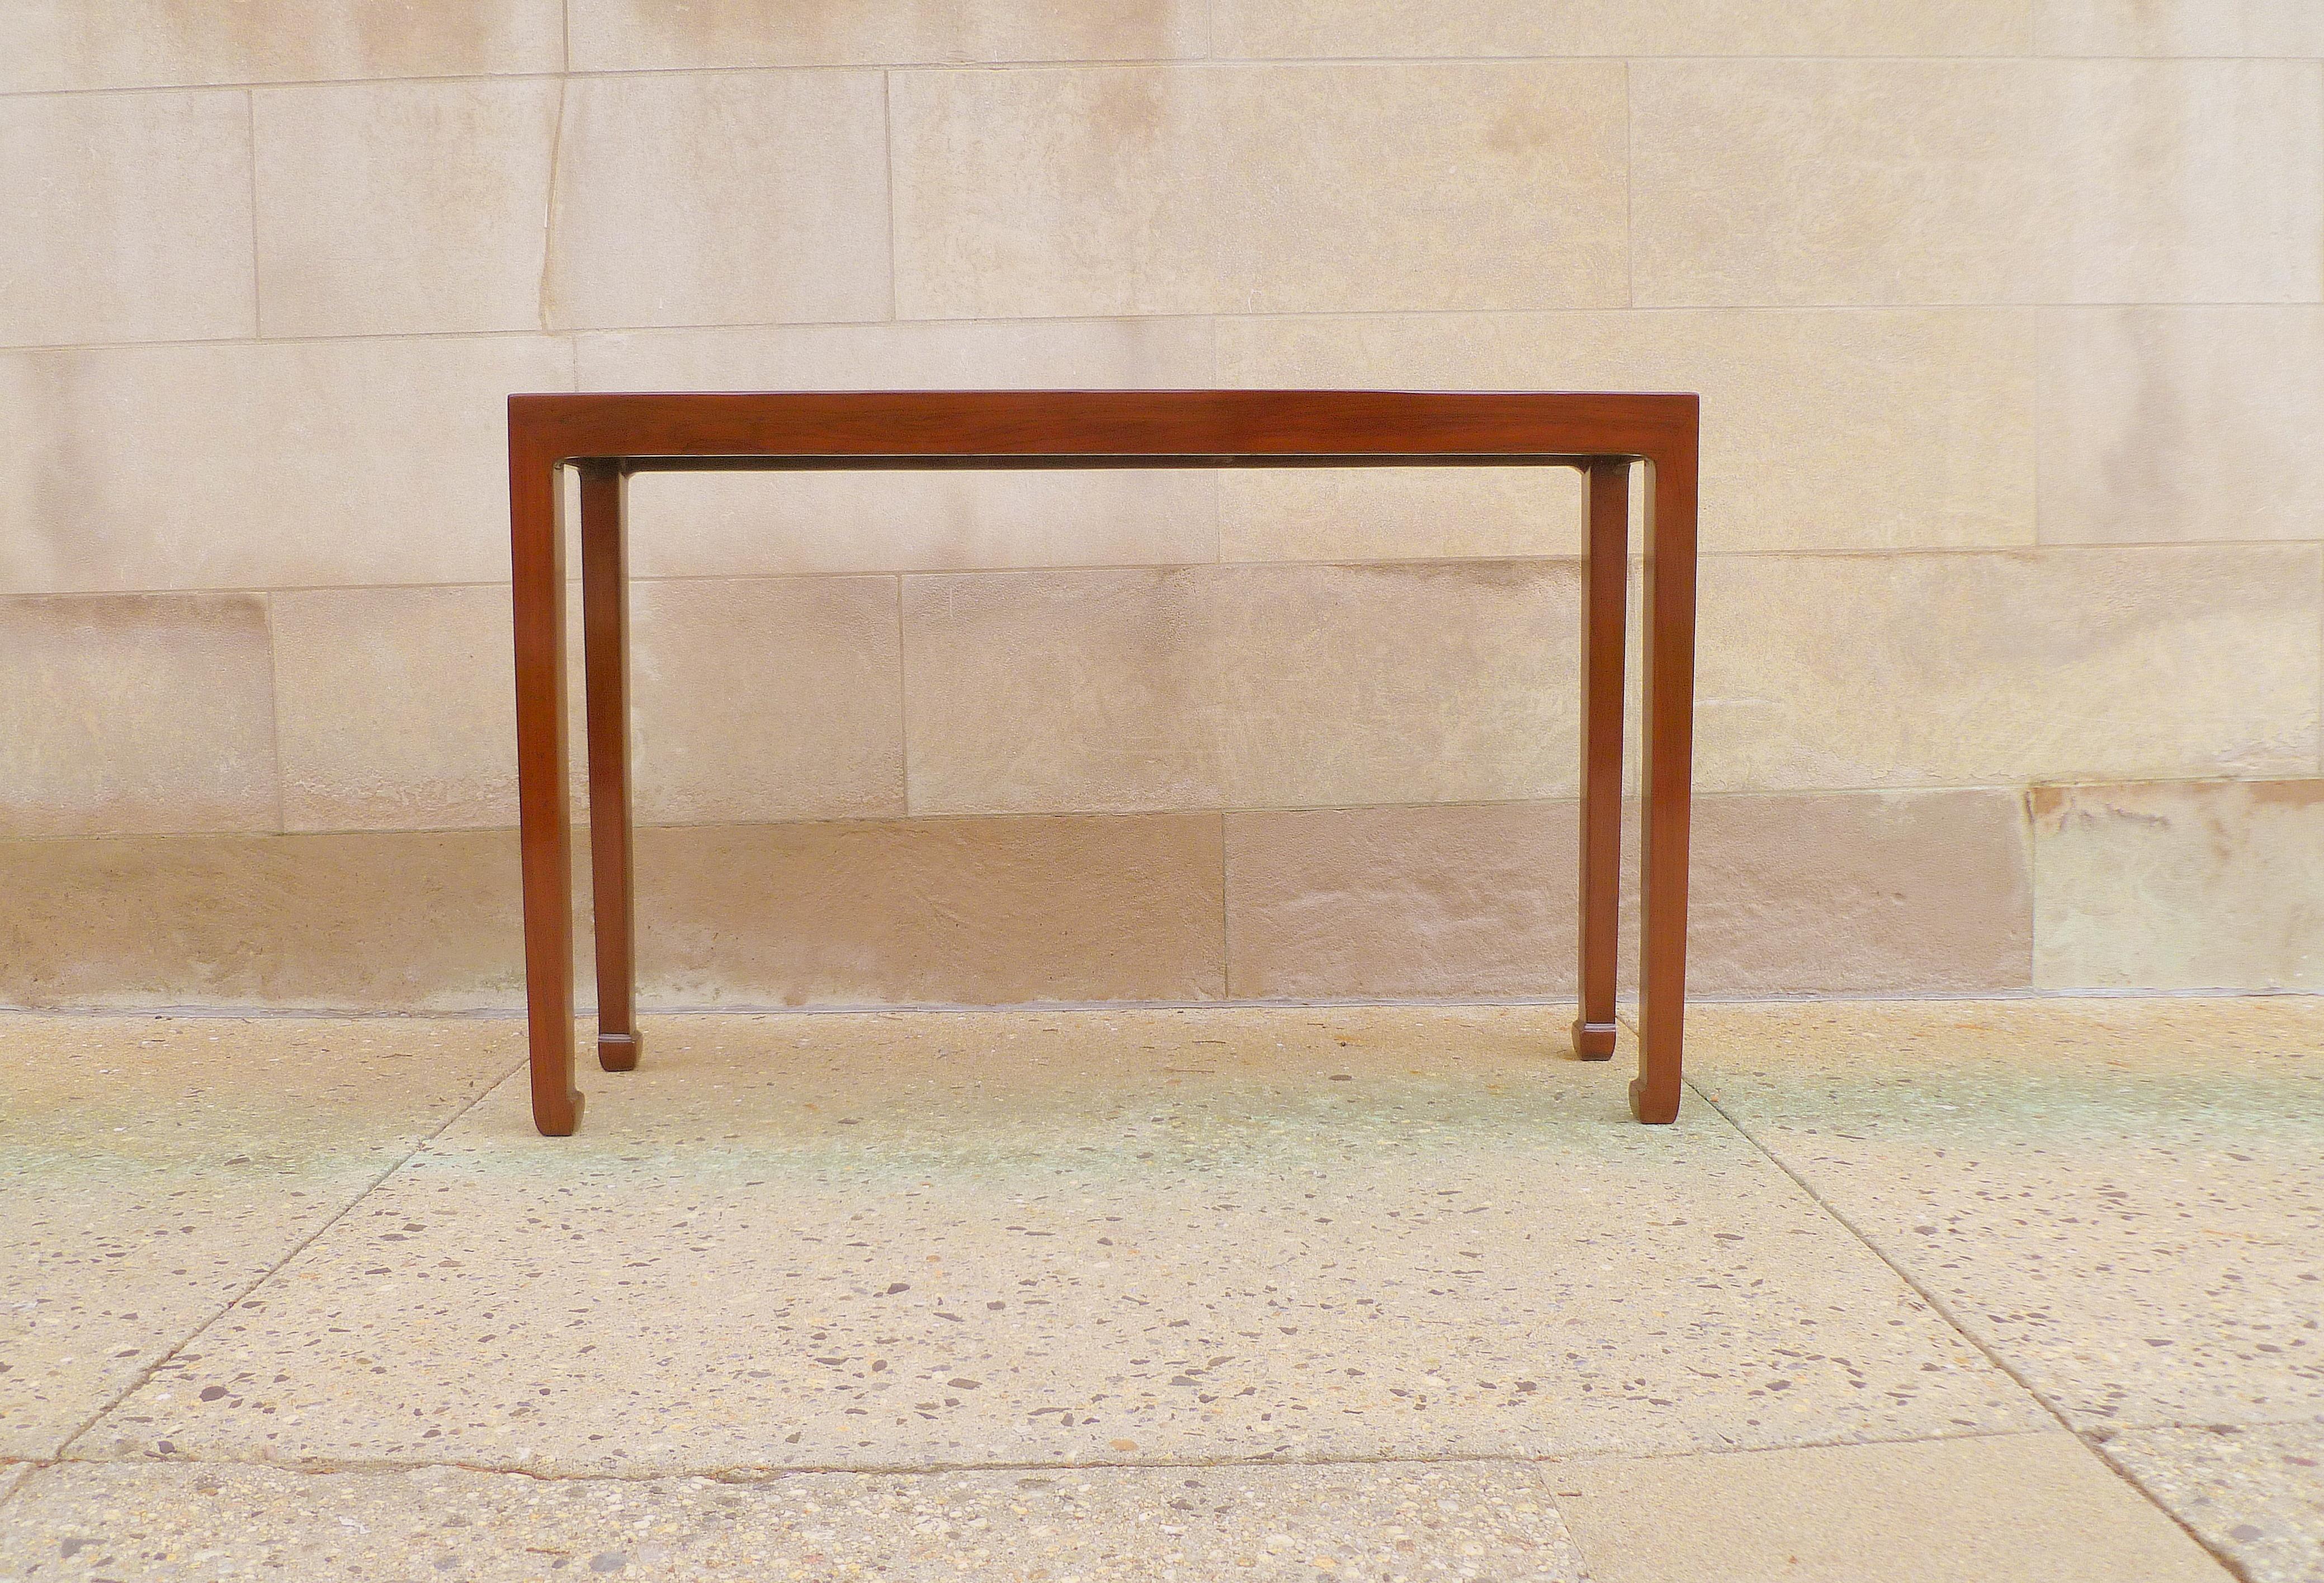 Jumu console table. Simple and elegant form with straight leg. We carry fine quality furniture with elegant finished and has been appeared many times in 